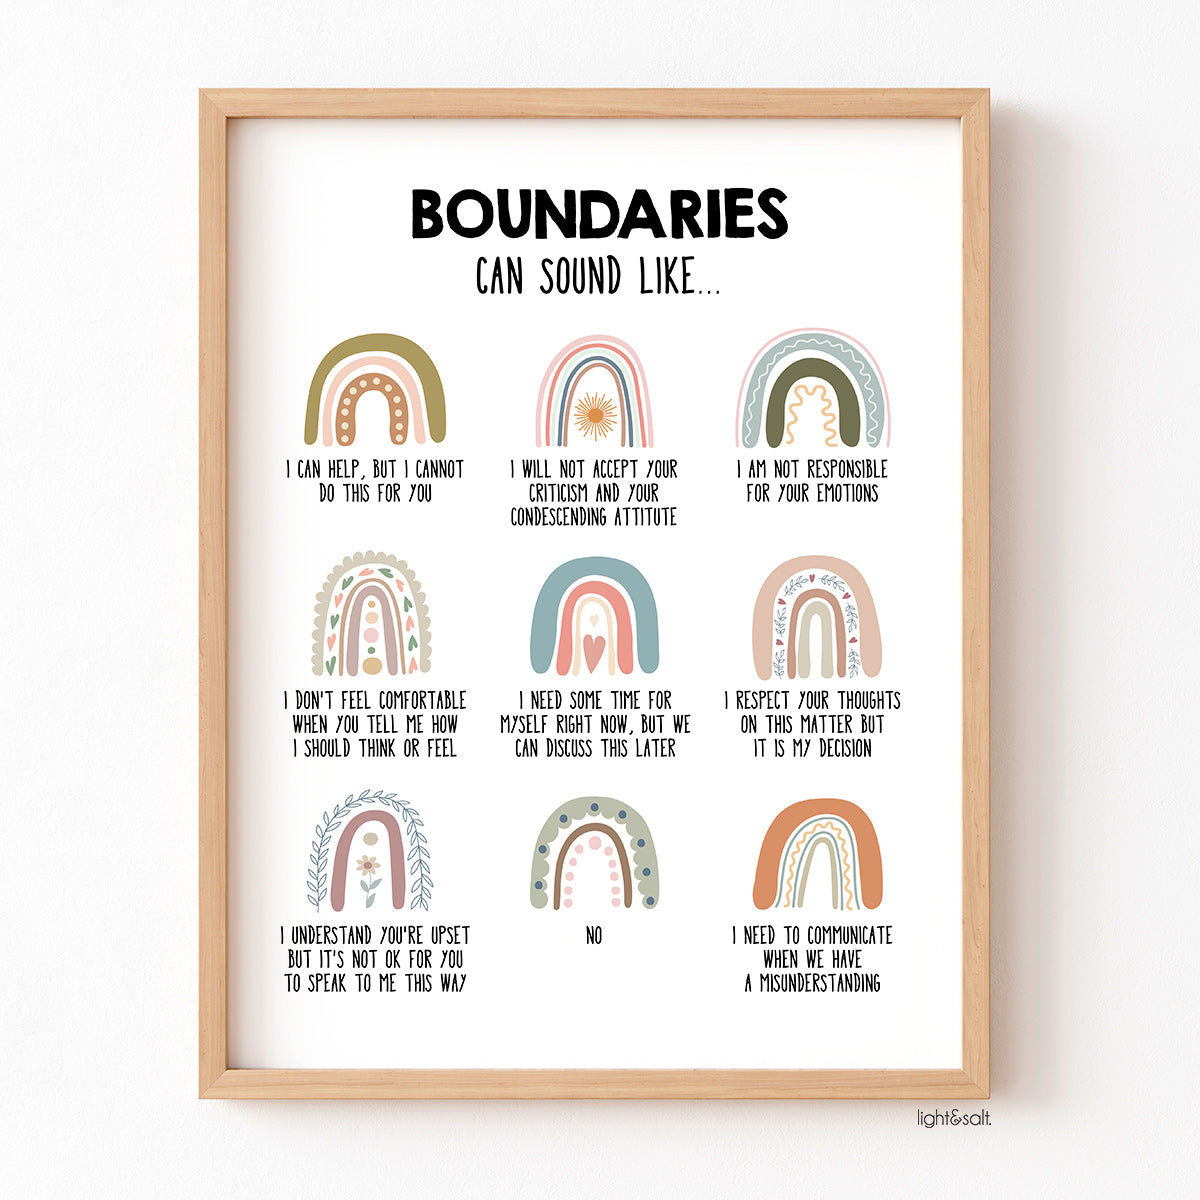 Boundaries can sound like... poster